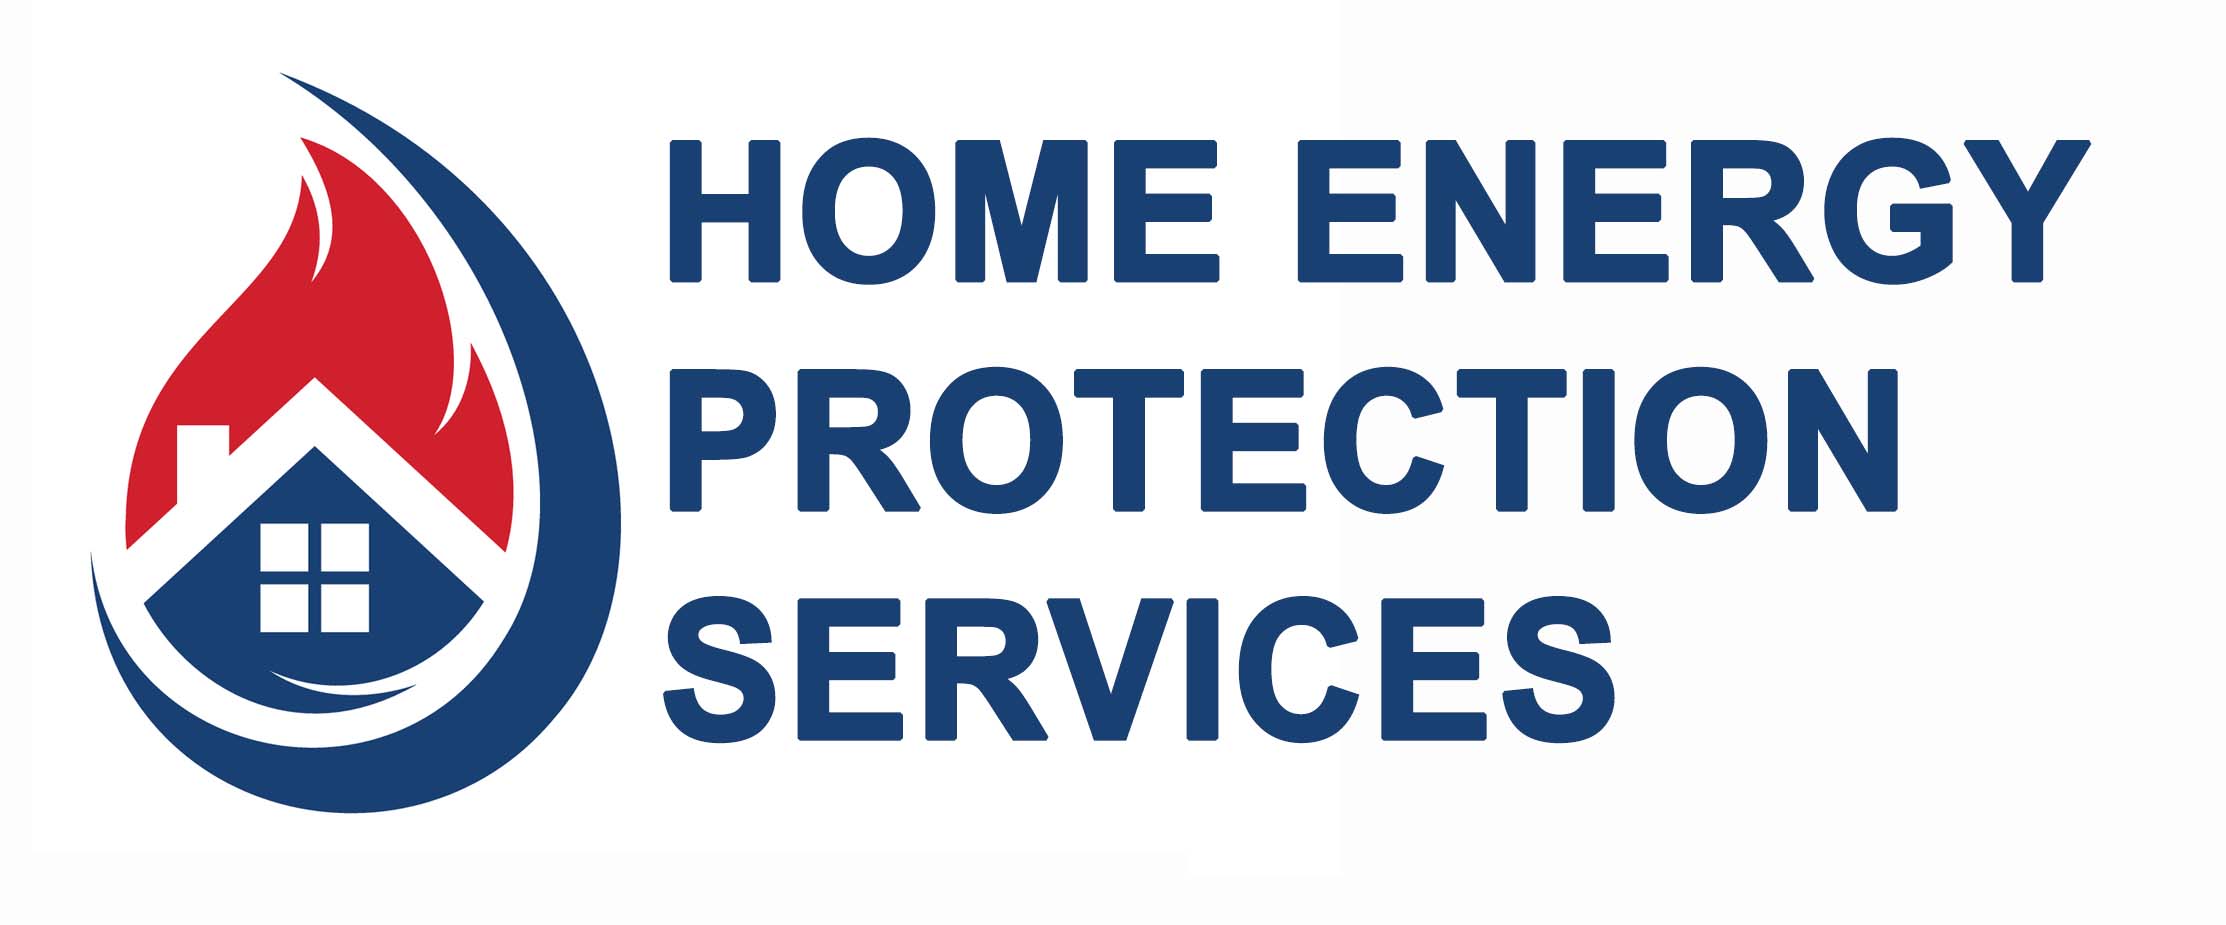 HOME ENERGY PROTECTION SERVICES